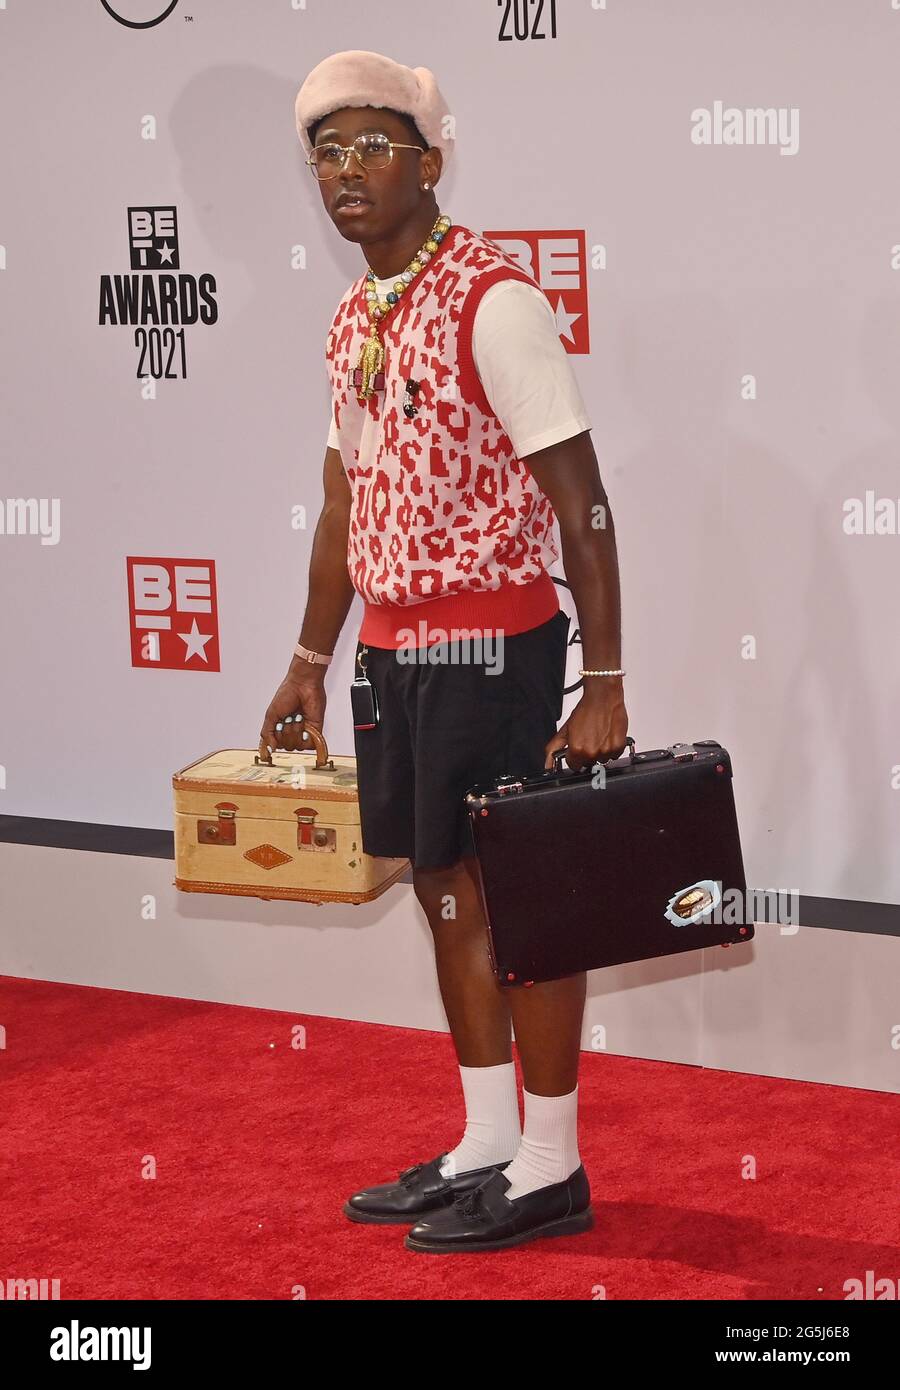 Los Angeles, United States. 28th June, 2021. Tyler, the Creator arrives for the BET Awards at the Microsoft Theater in Los Angeles on Sunday, June 27, 2021. After a socially distanced ceremony in 2020 due to the coronavirus pandemic, the BET Awards returned to a live ceremony. Photo by Jim Ruymen/UPI Credit: UPI/Alamy Live News Stock Photo